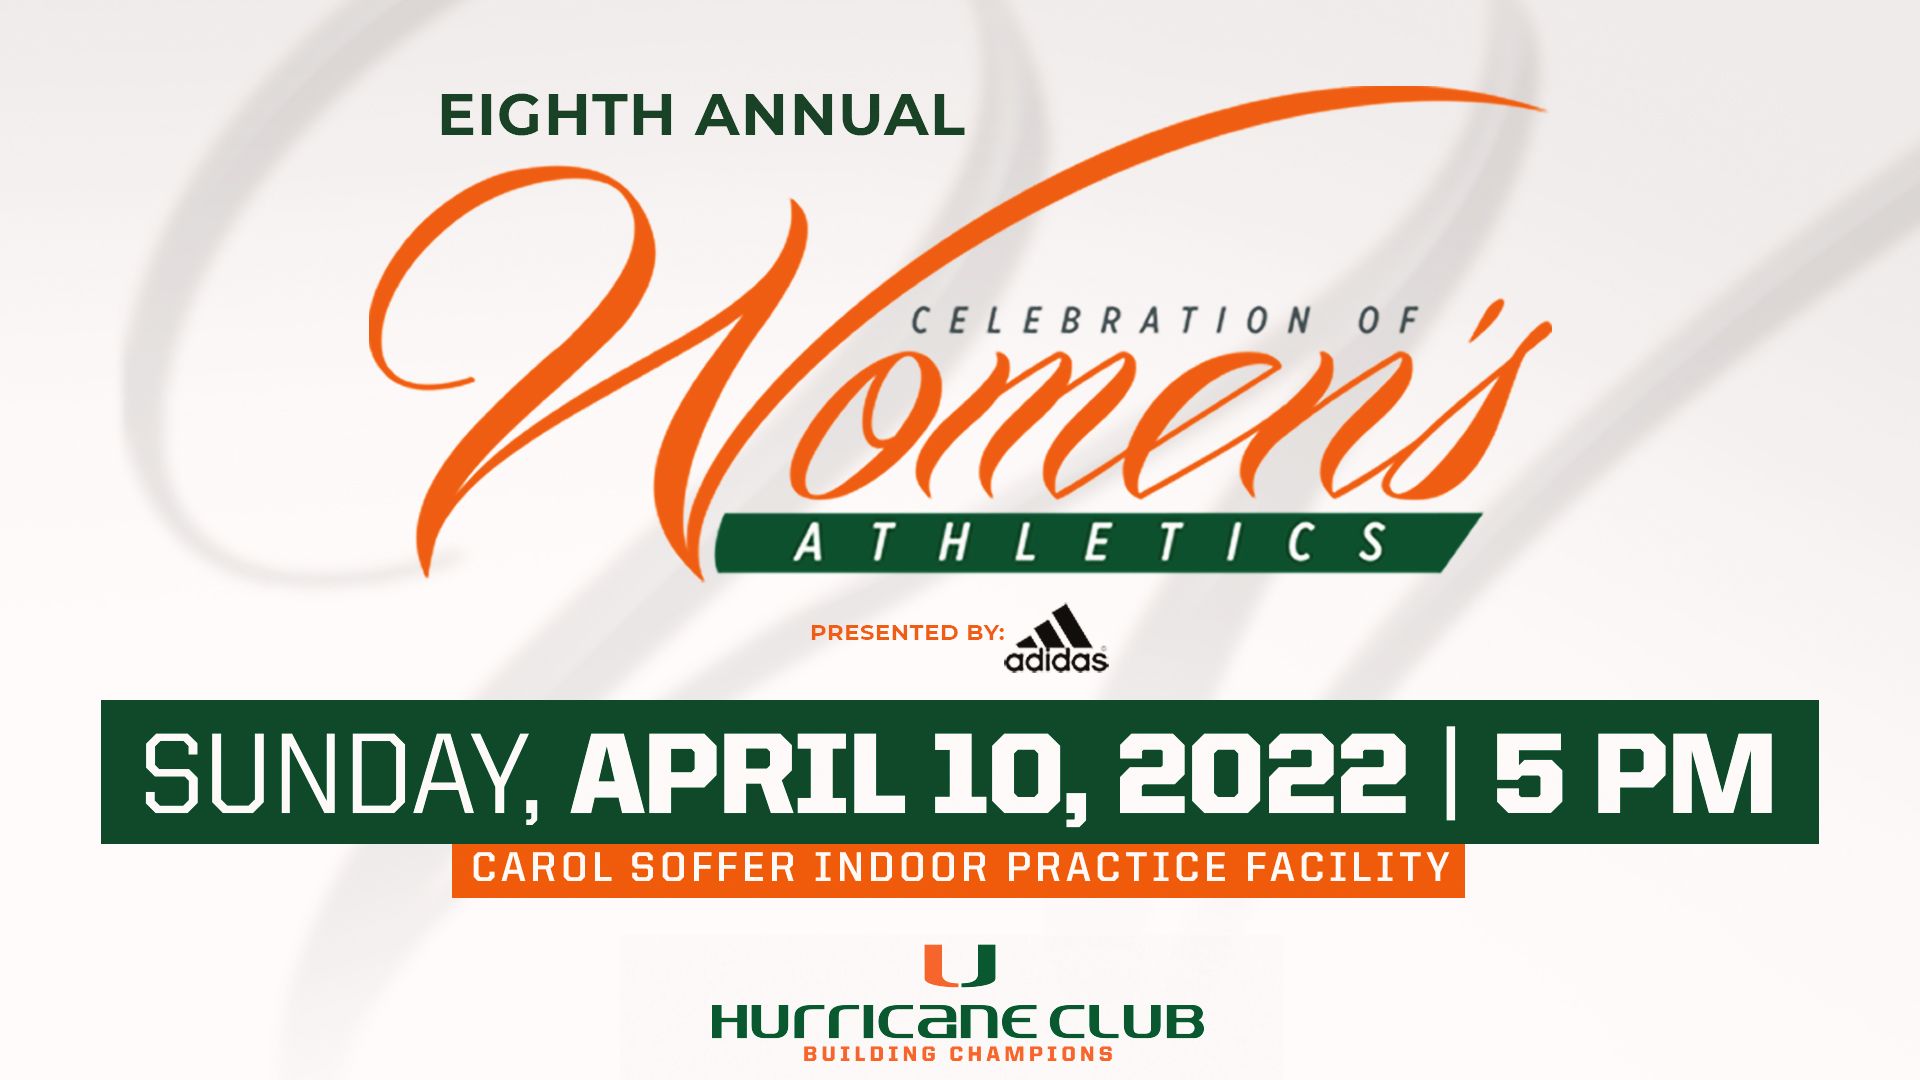 Tickets on Sale for Eighth Annual Celebration of Women’s Athletics